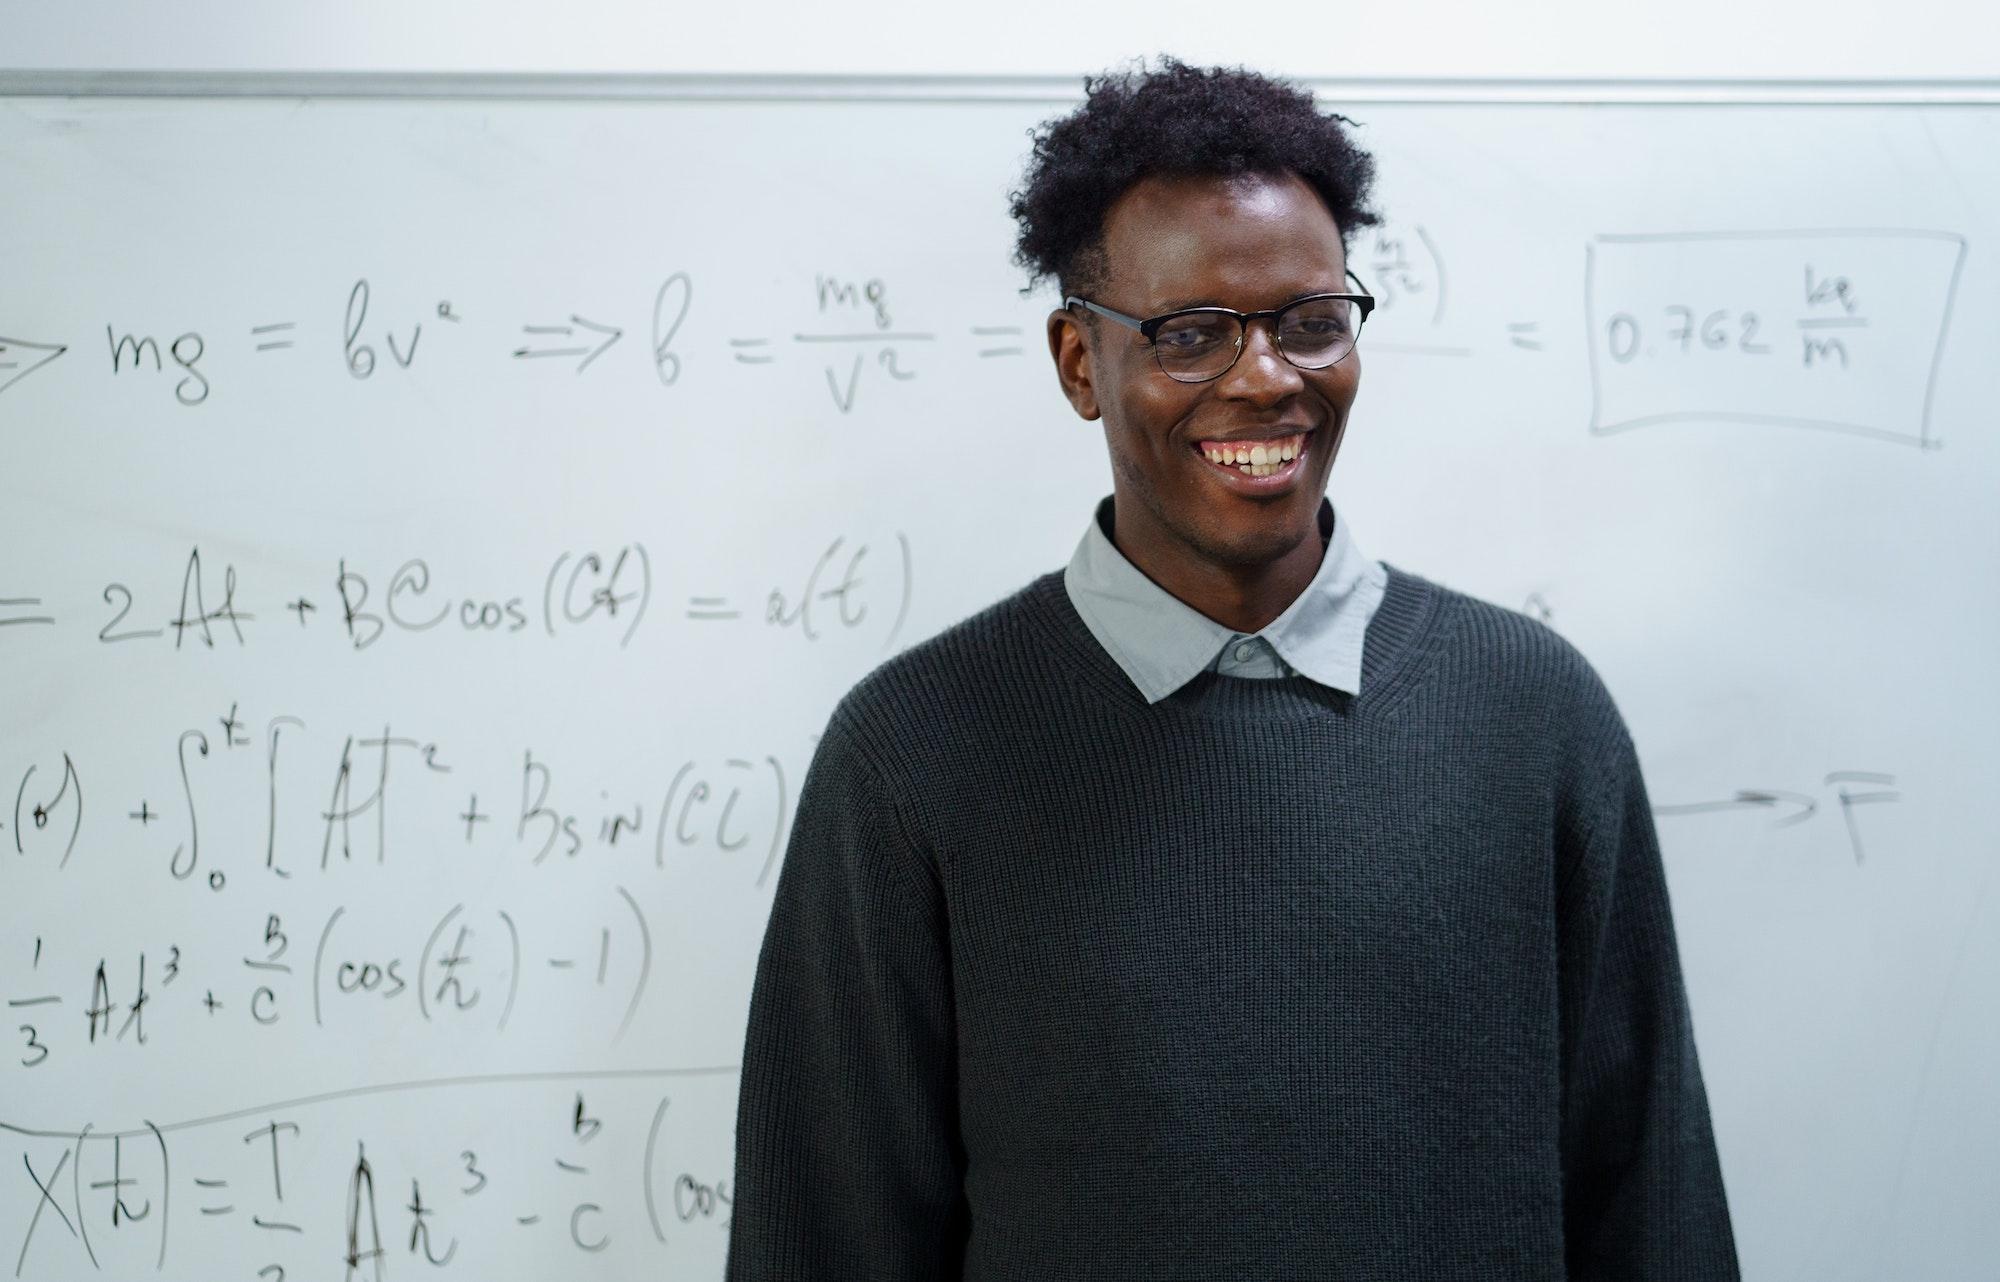 A math teacher in a Colorado public school stands in front of the whiteboard in his classroom. He wears glasses and is looking at the camera and smiling. There are math equations filling up the whiteboard behind him.